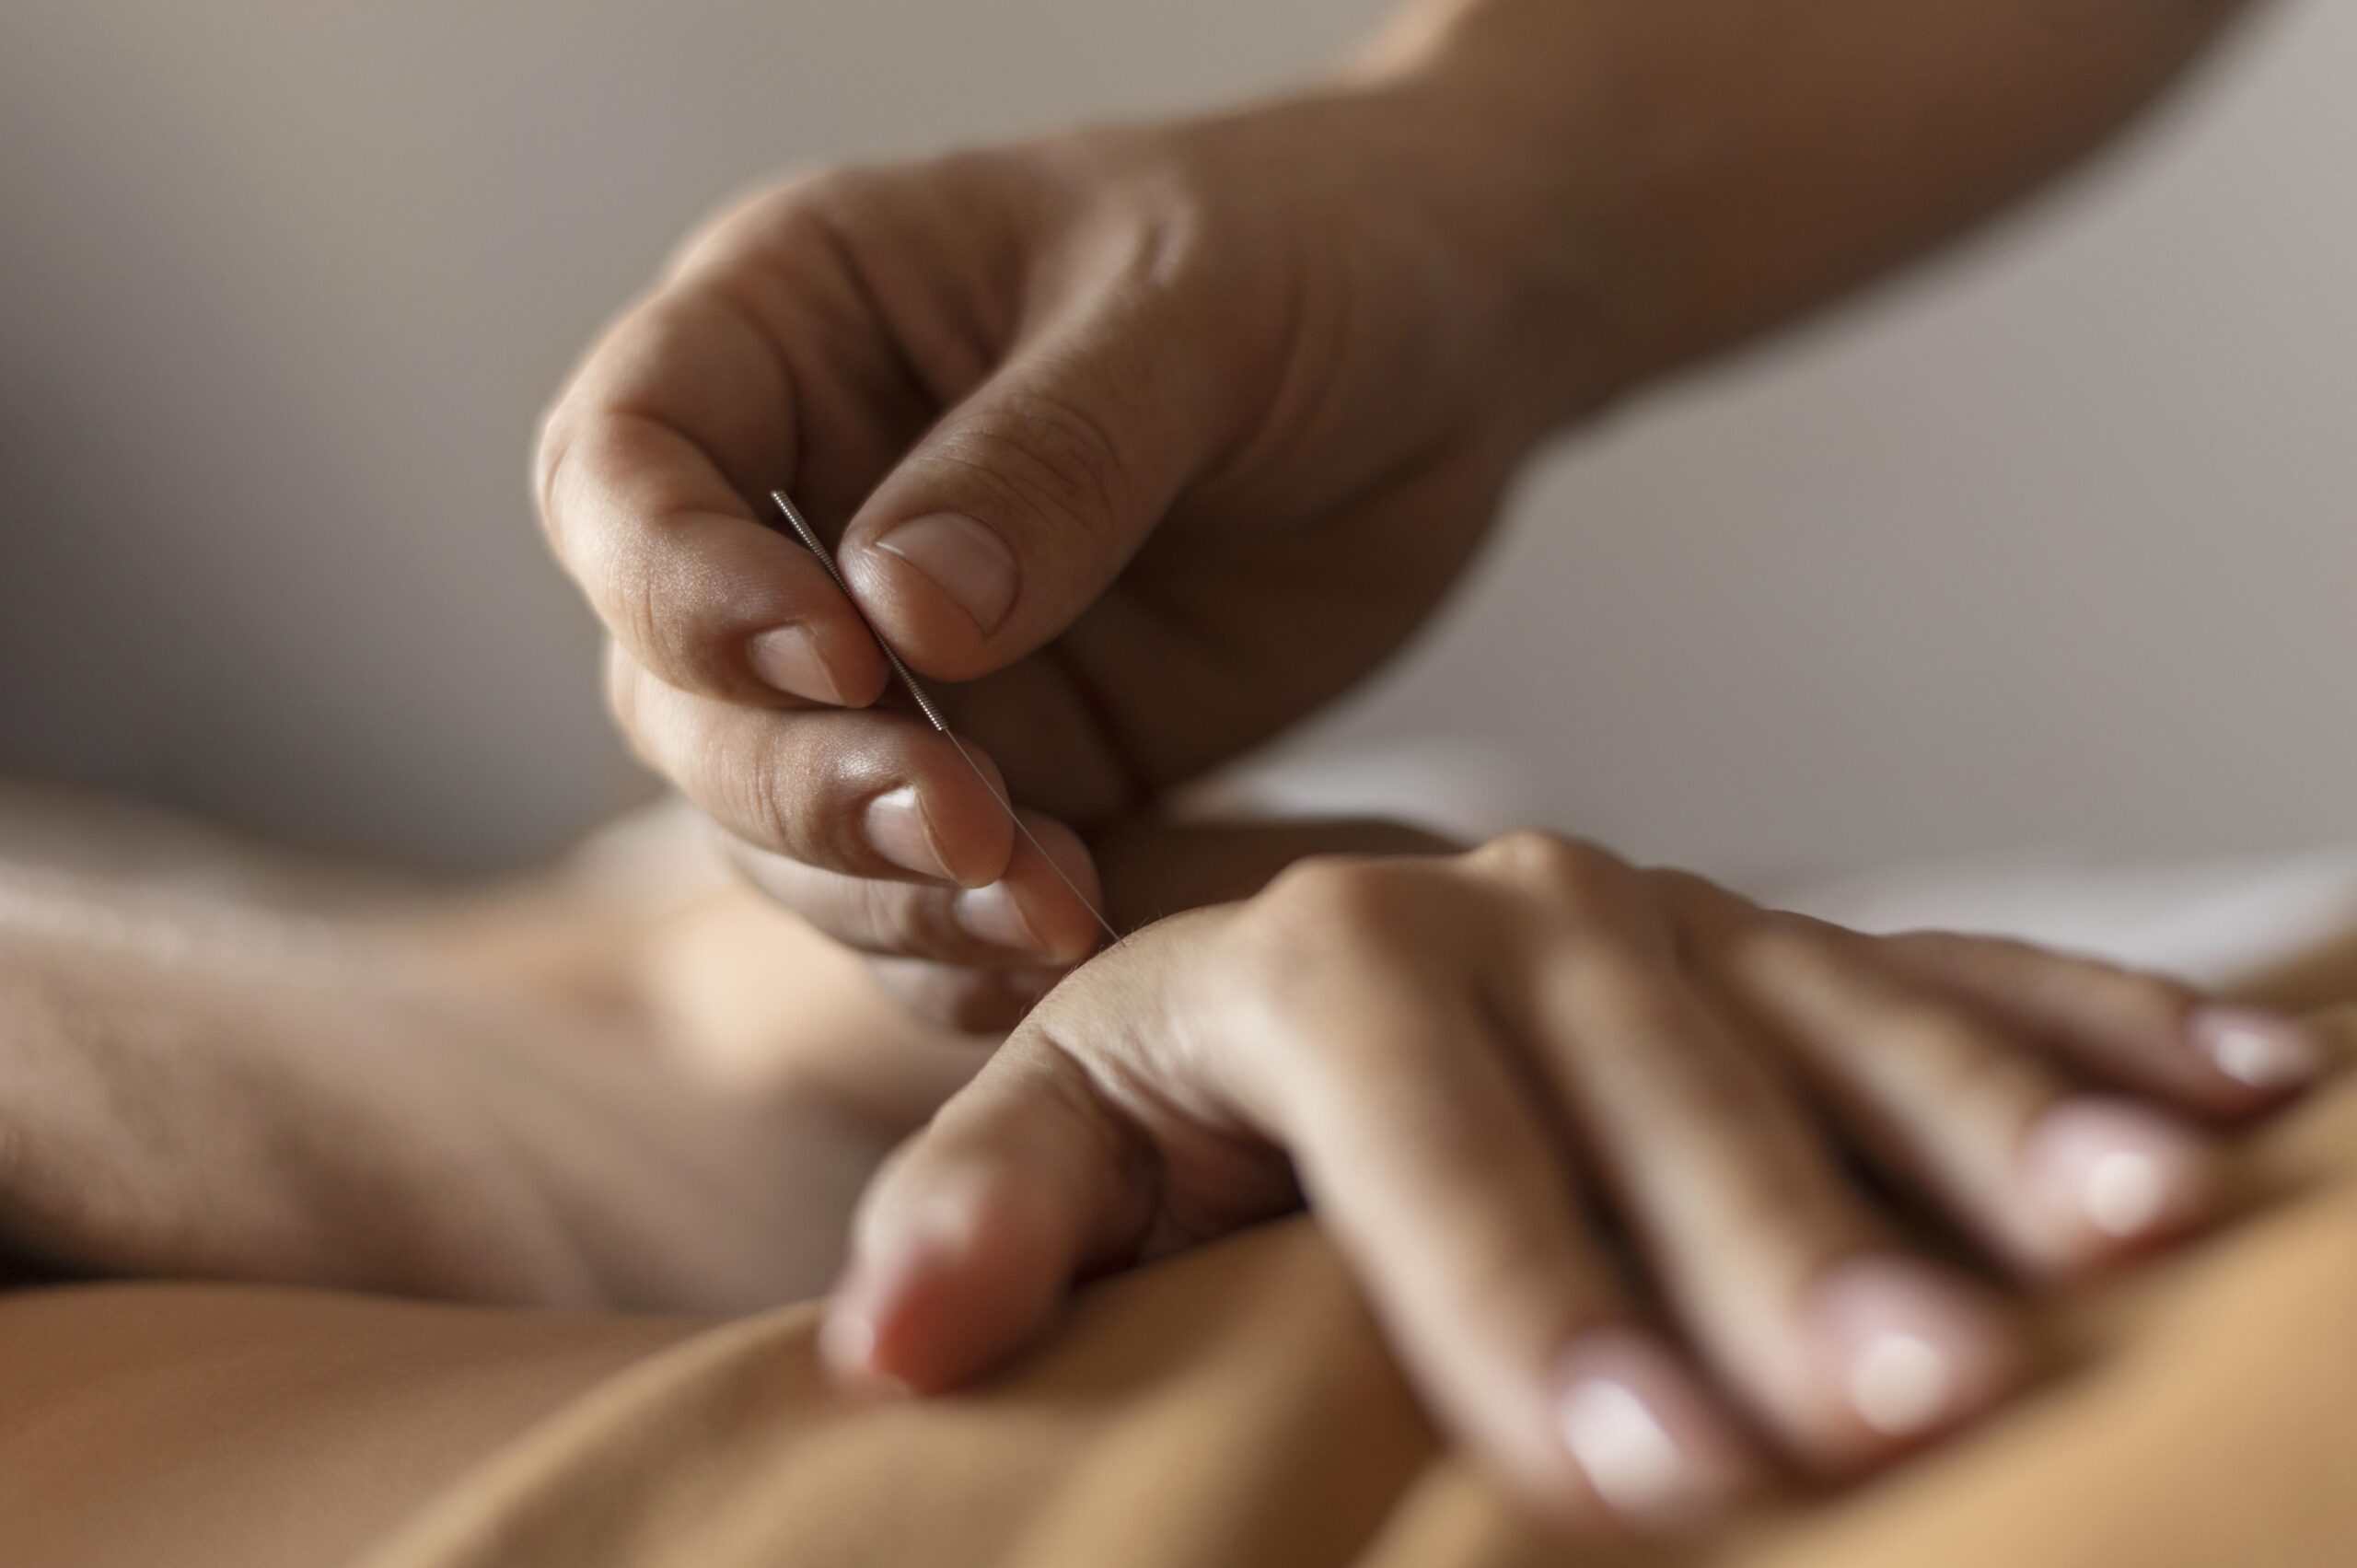 HOW TO USE ACUPUNCTURE FOR HAND PAIN RELIEF